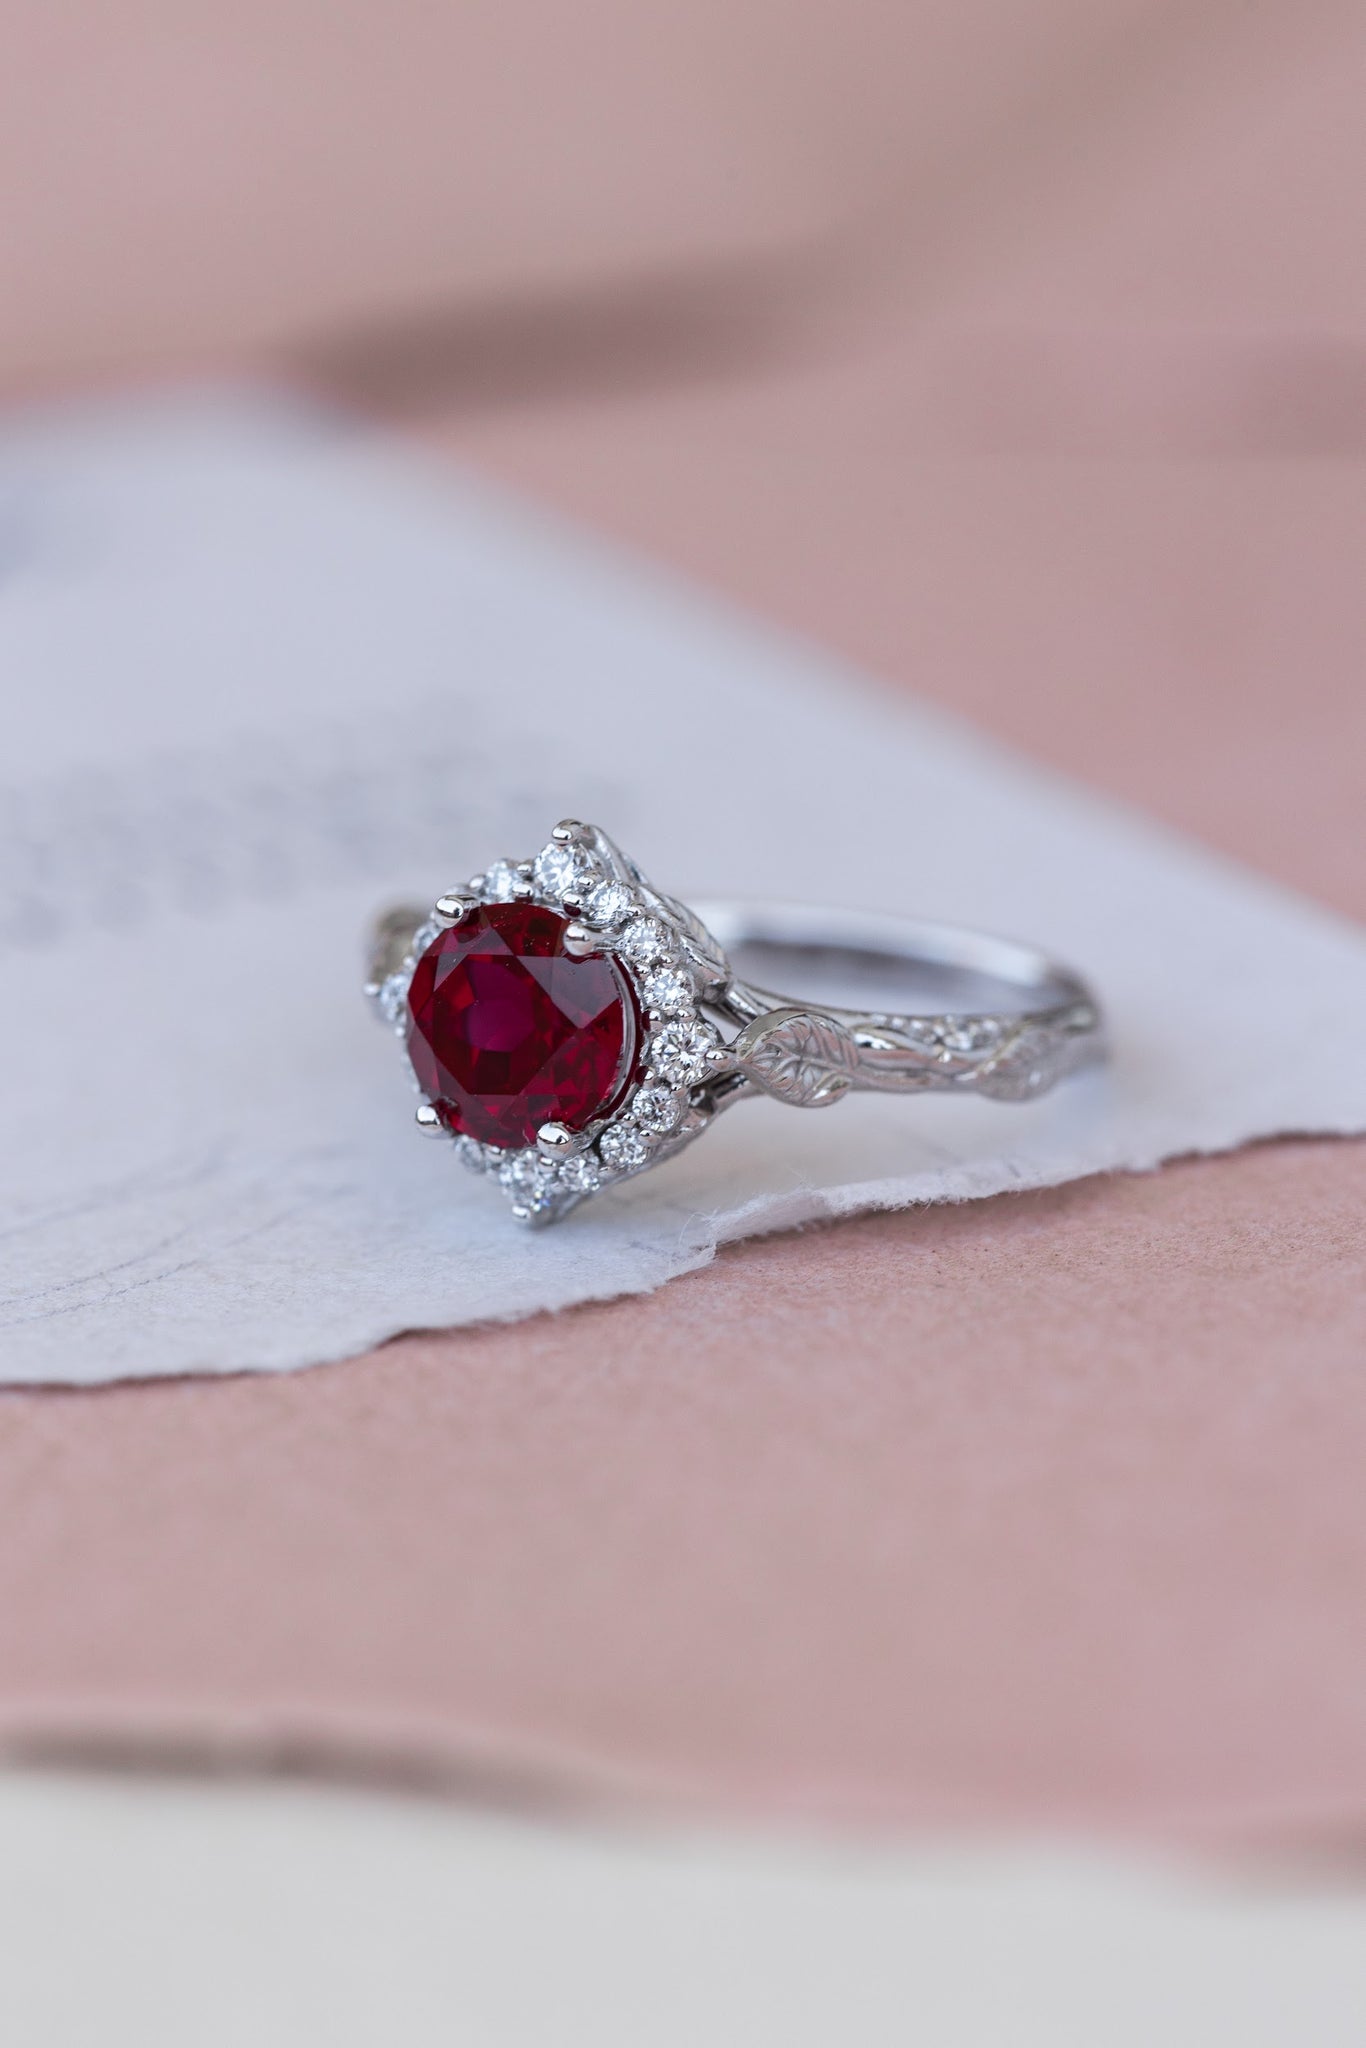 Halo engagement ring with 1.5 carat lab ruby, white gold leaf engagement ring  / Florentina - Eden Garden Jewelry™